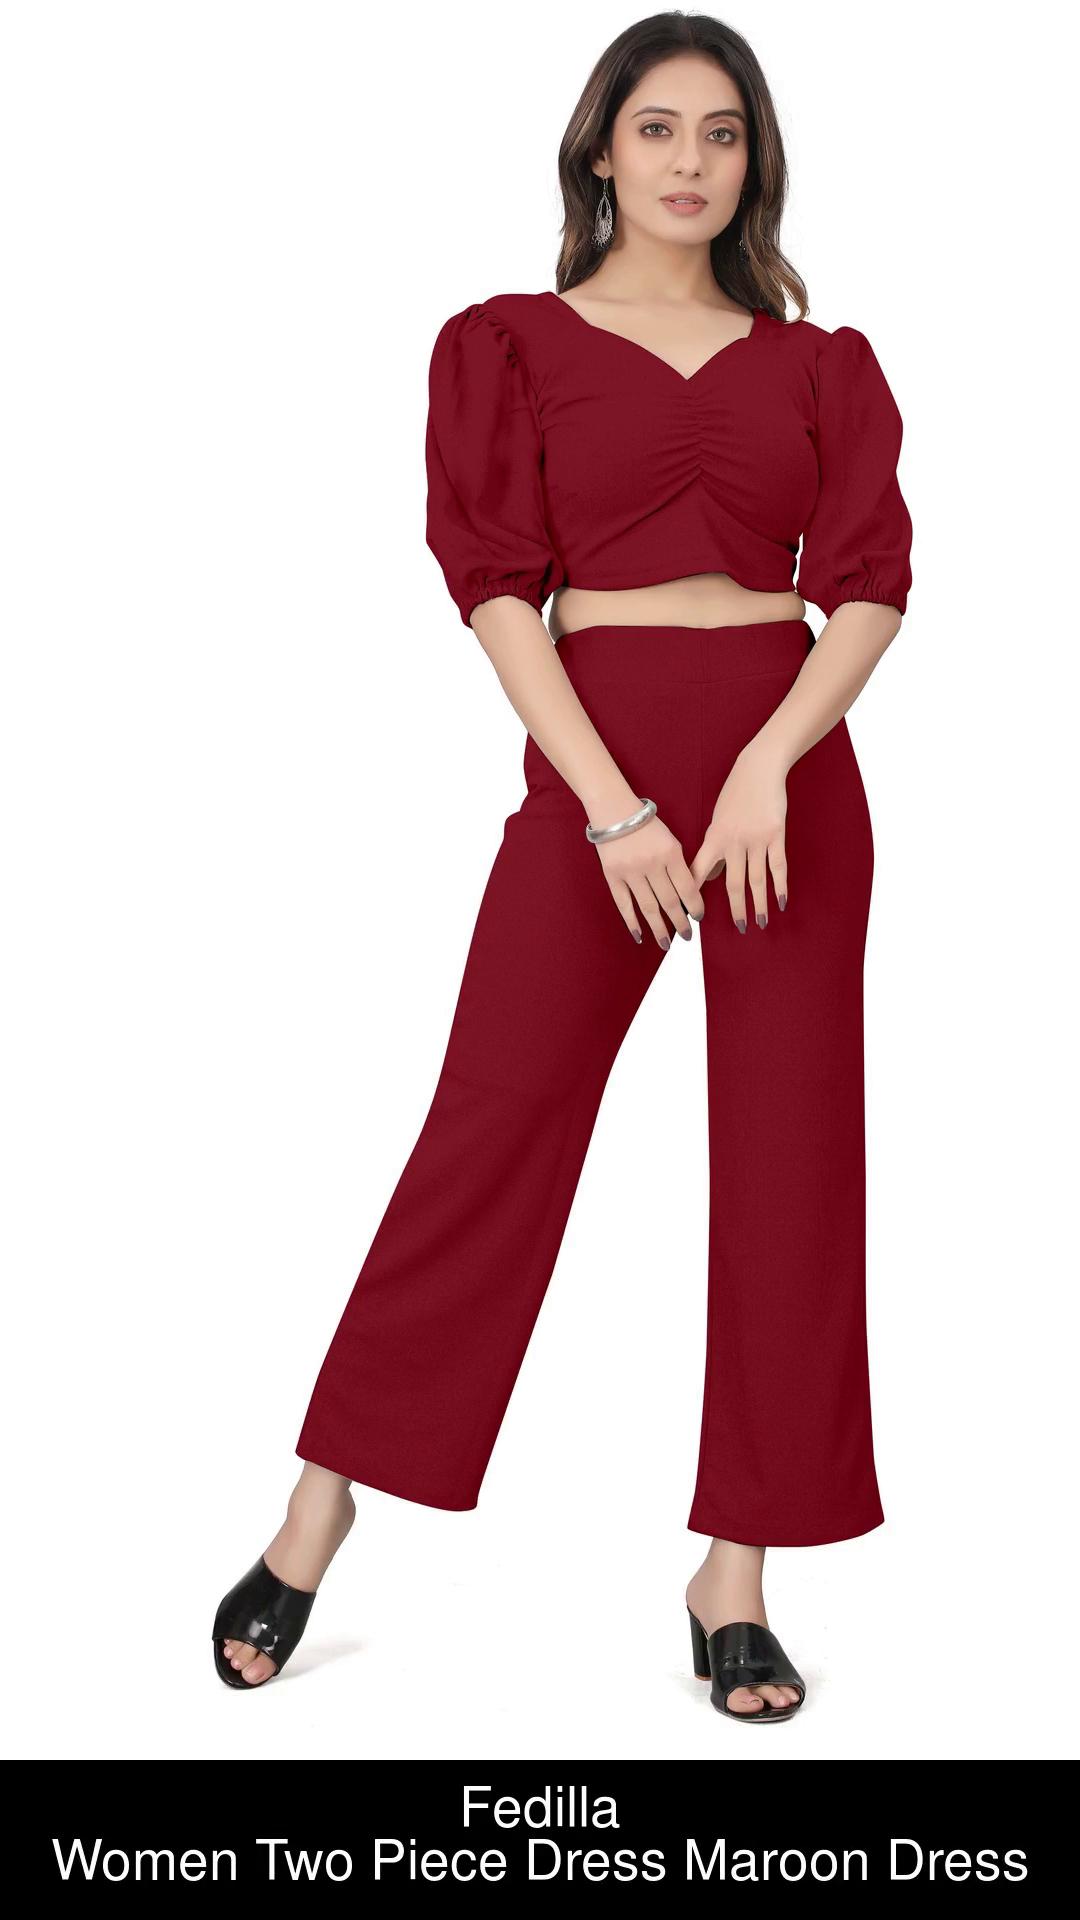 Fedilla Women Two Piece Dress Maroon Dress - Buy Fedilla Women Two Piece  Dress Maroon Dress Online at Best Prices in India